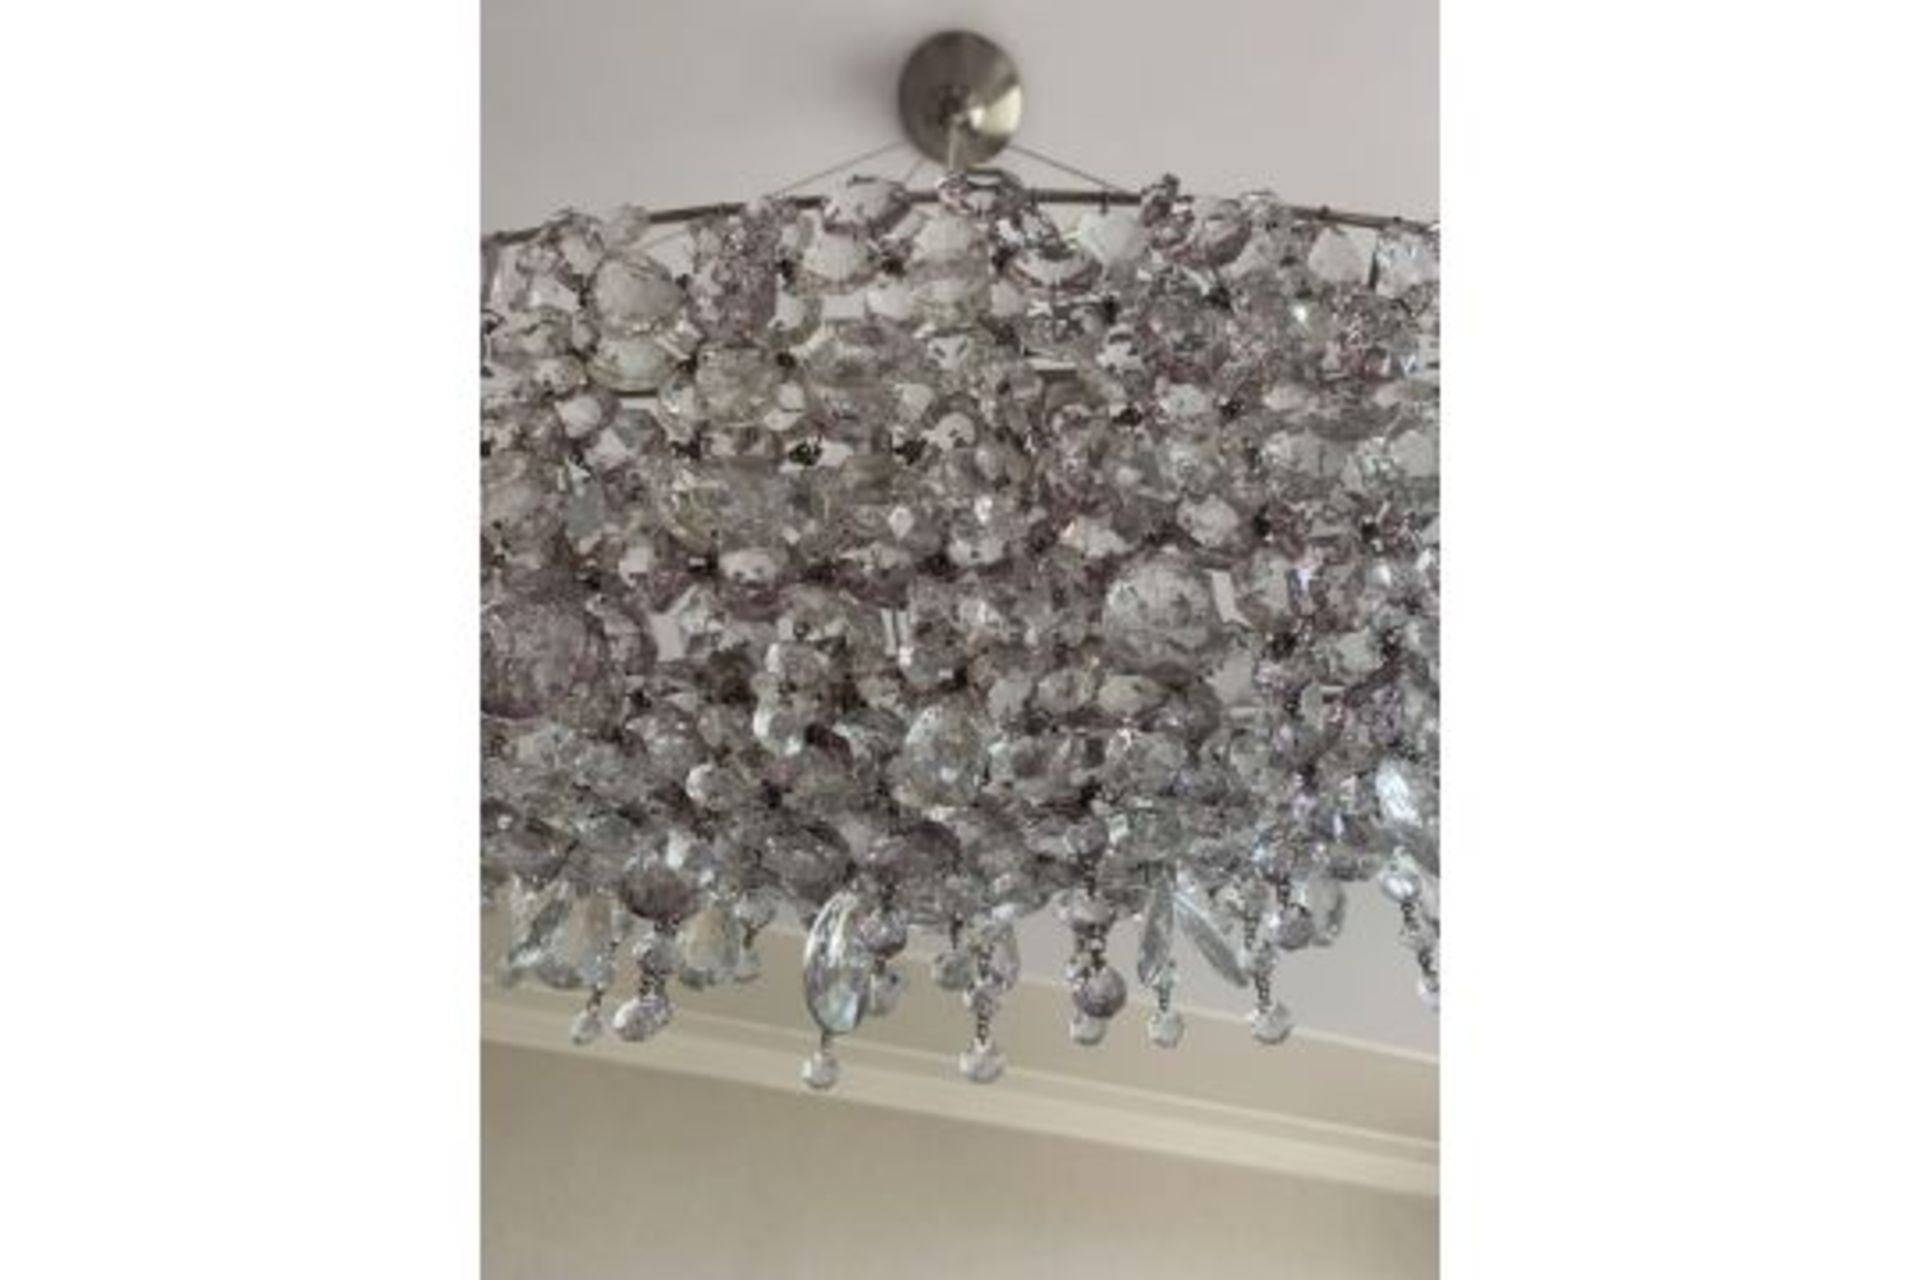 Lolli E Memmoli Ugolino Chandelier Crystals Woven Together Like Fabric, Hung From A Two- - Image 3 of 3